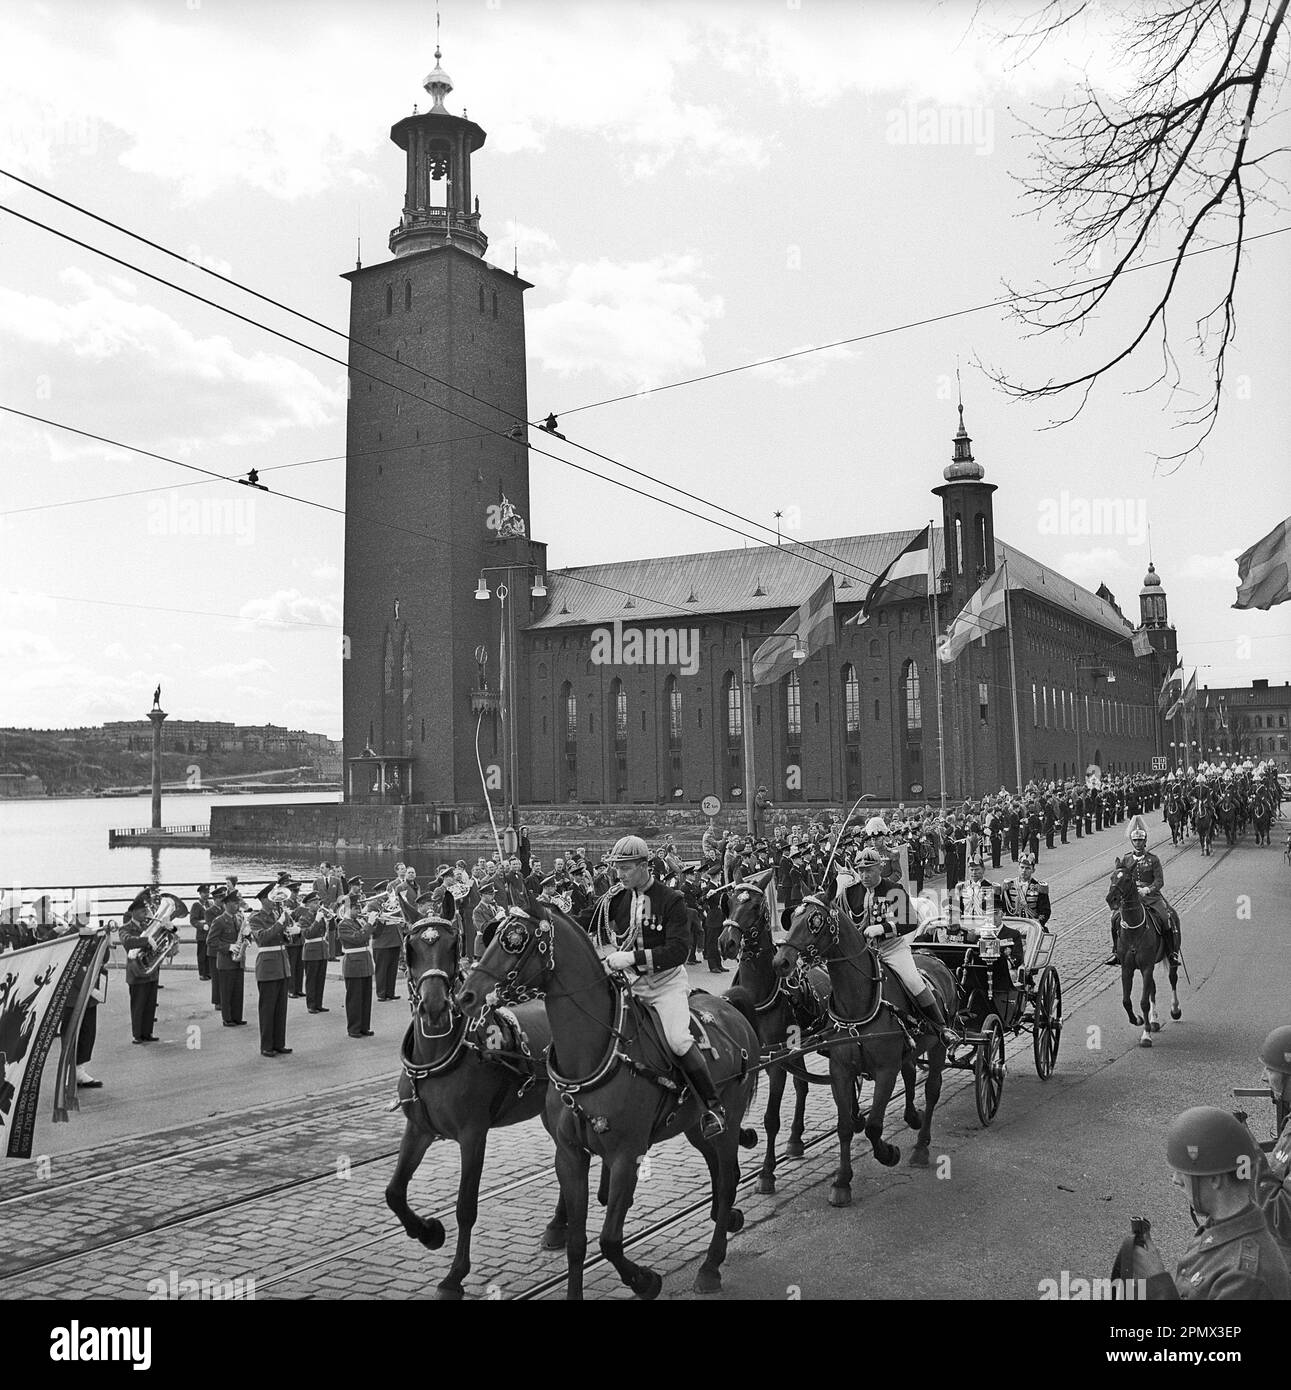 King Gustaf VI Adolf of Sweden. Pictured beside the Shah of Iran, Mohammad Reza Pahlavi during his visit to Sweden and Stockholm 7-11 may 1960. The carriage is seen passing Stockholm City Hall on it's way to the royal castle. Stock Photo